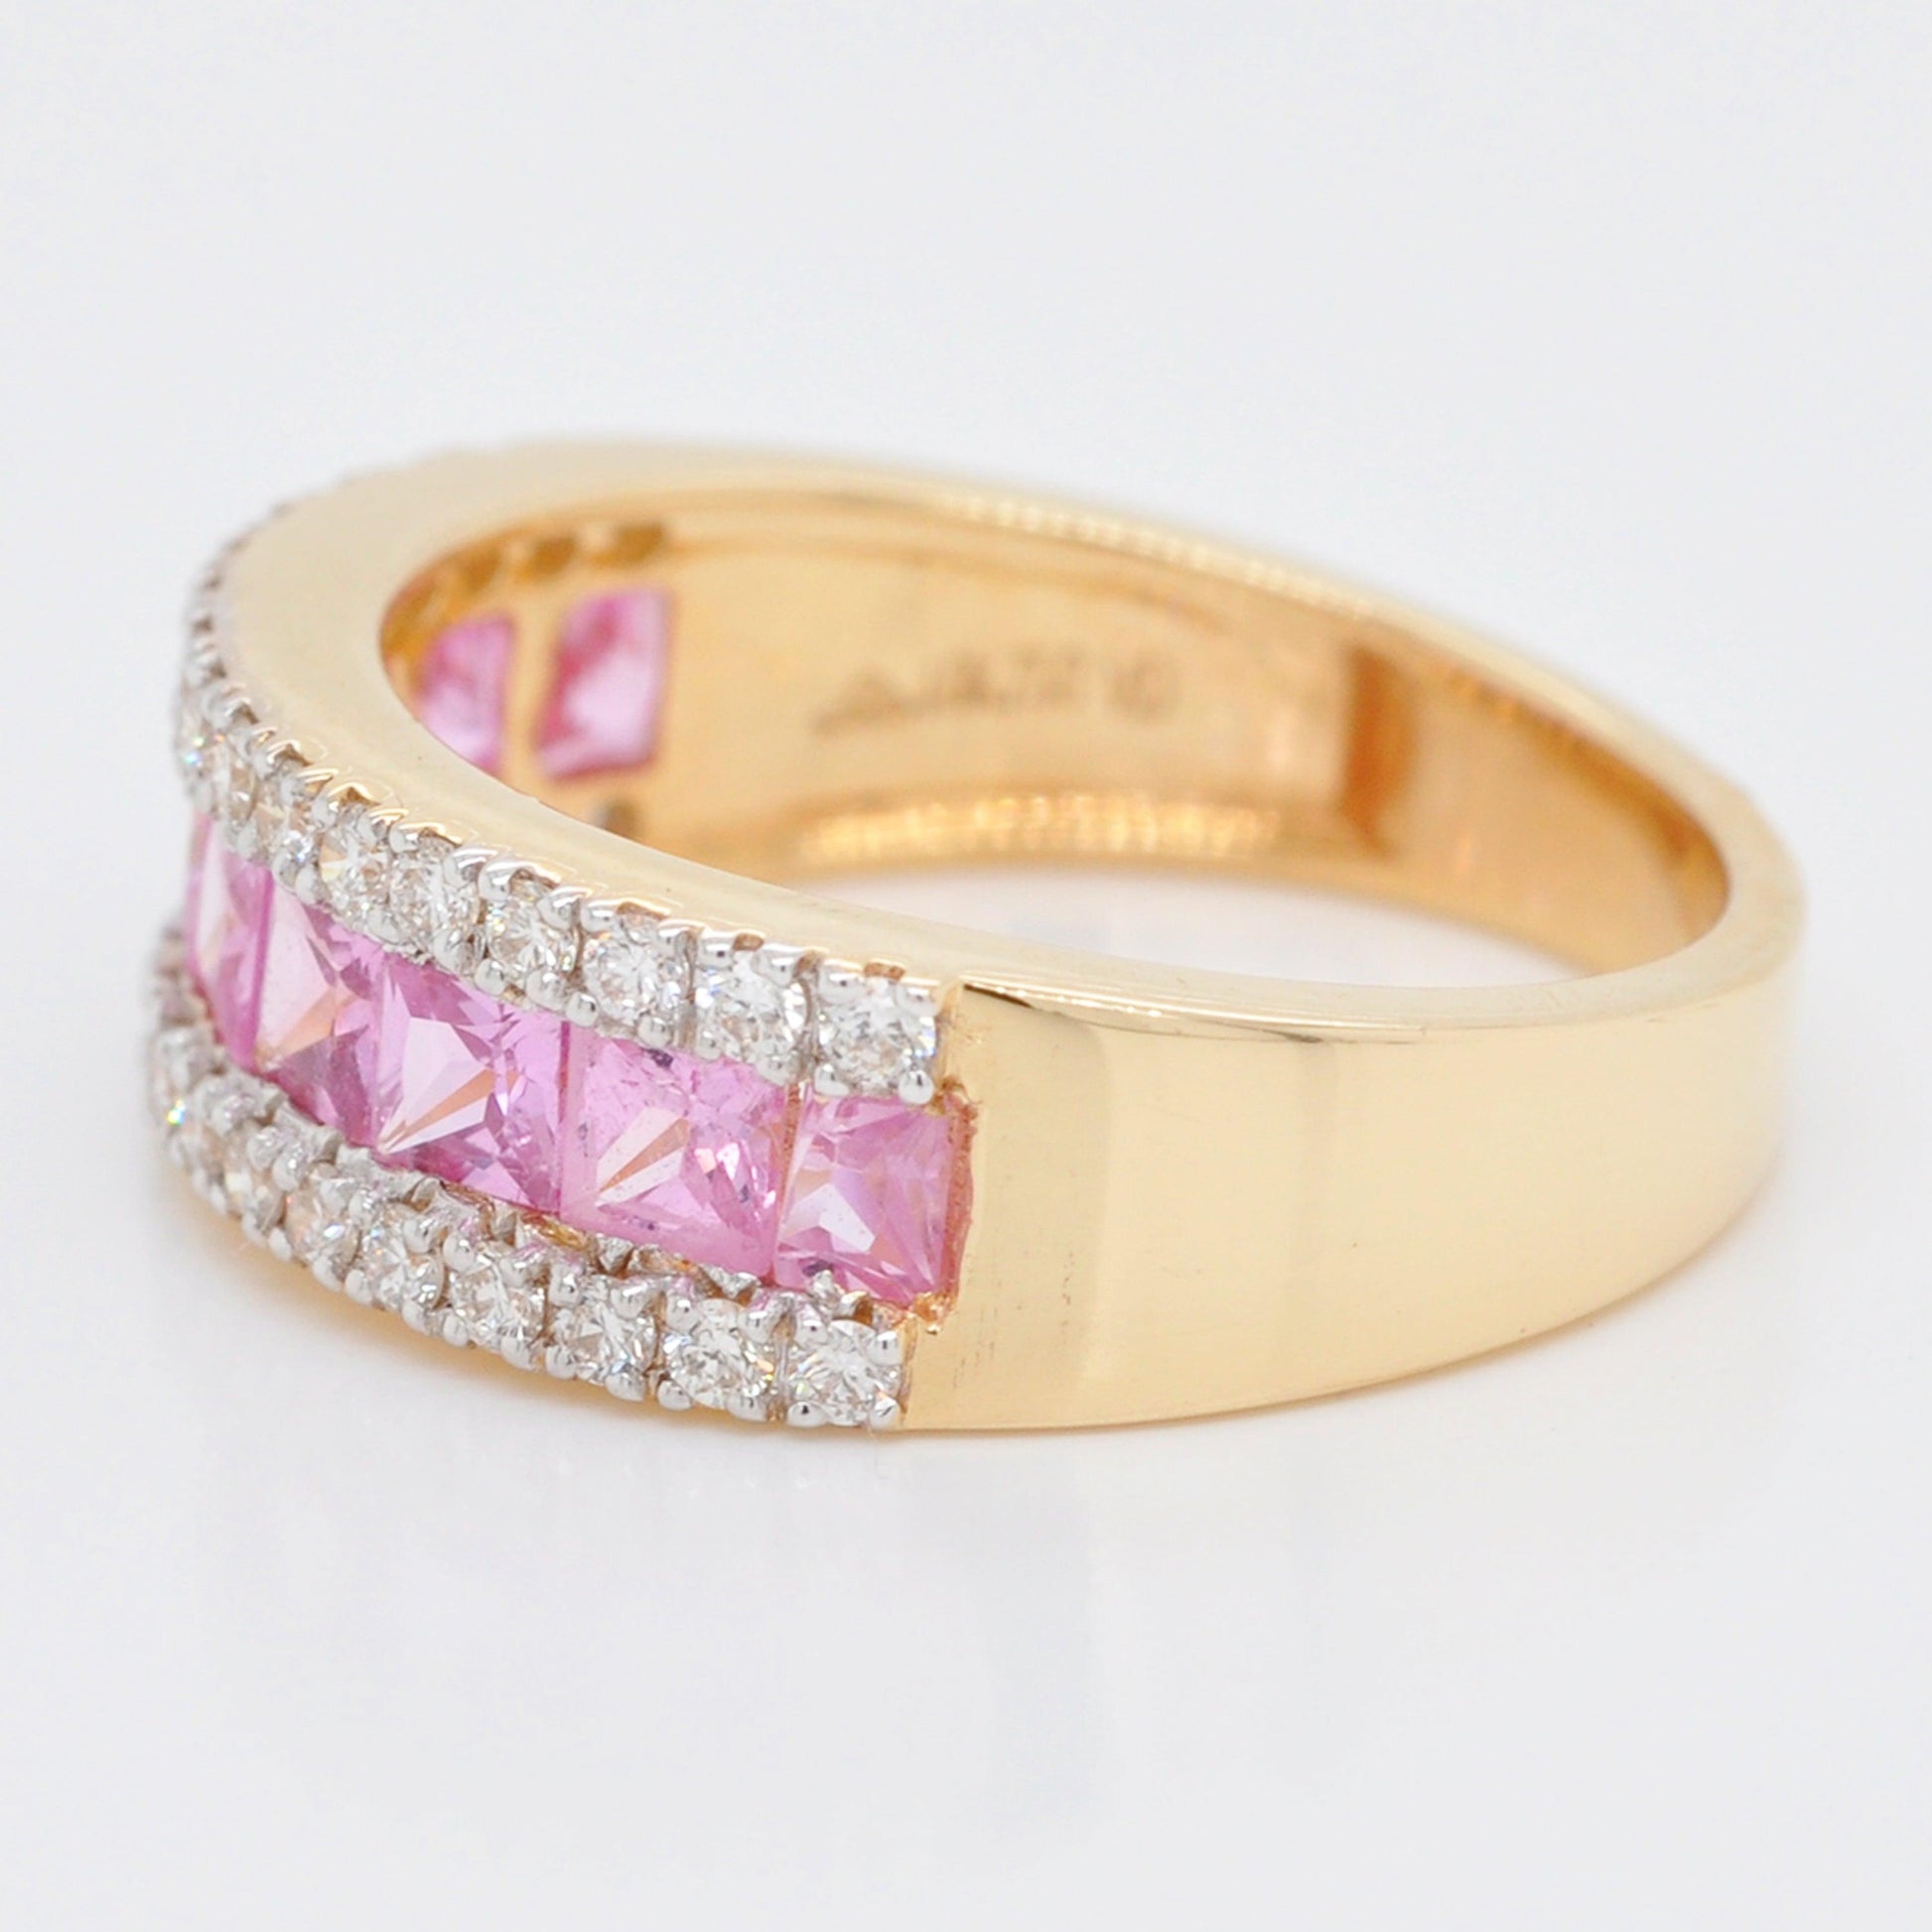 Pink sapphire eternity band ring